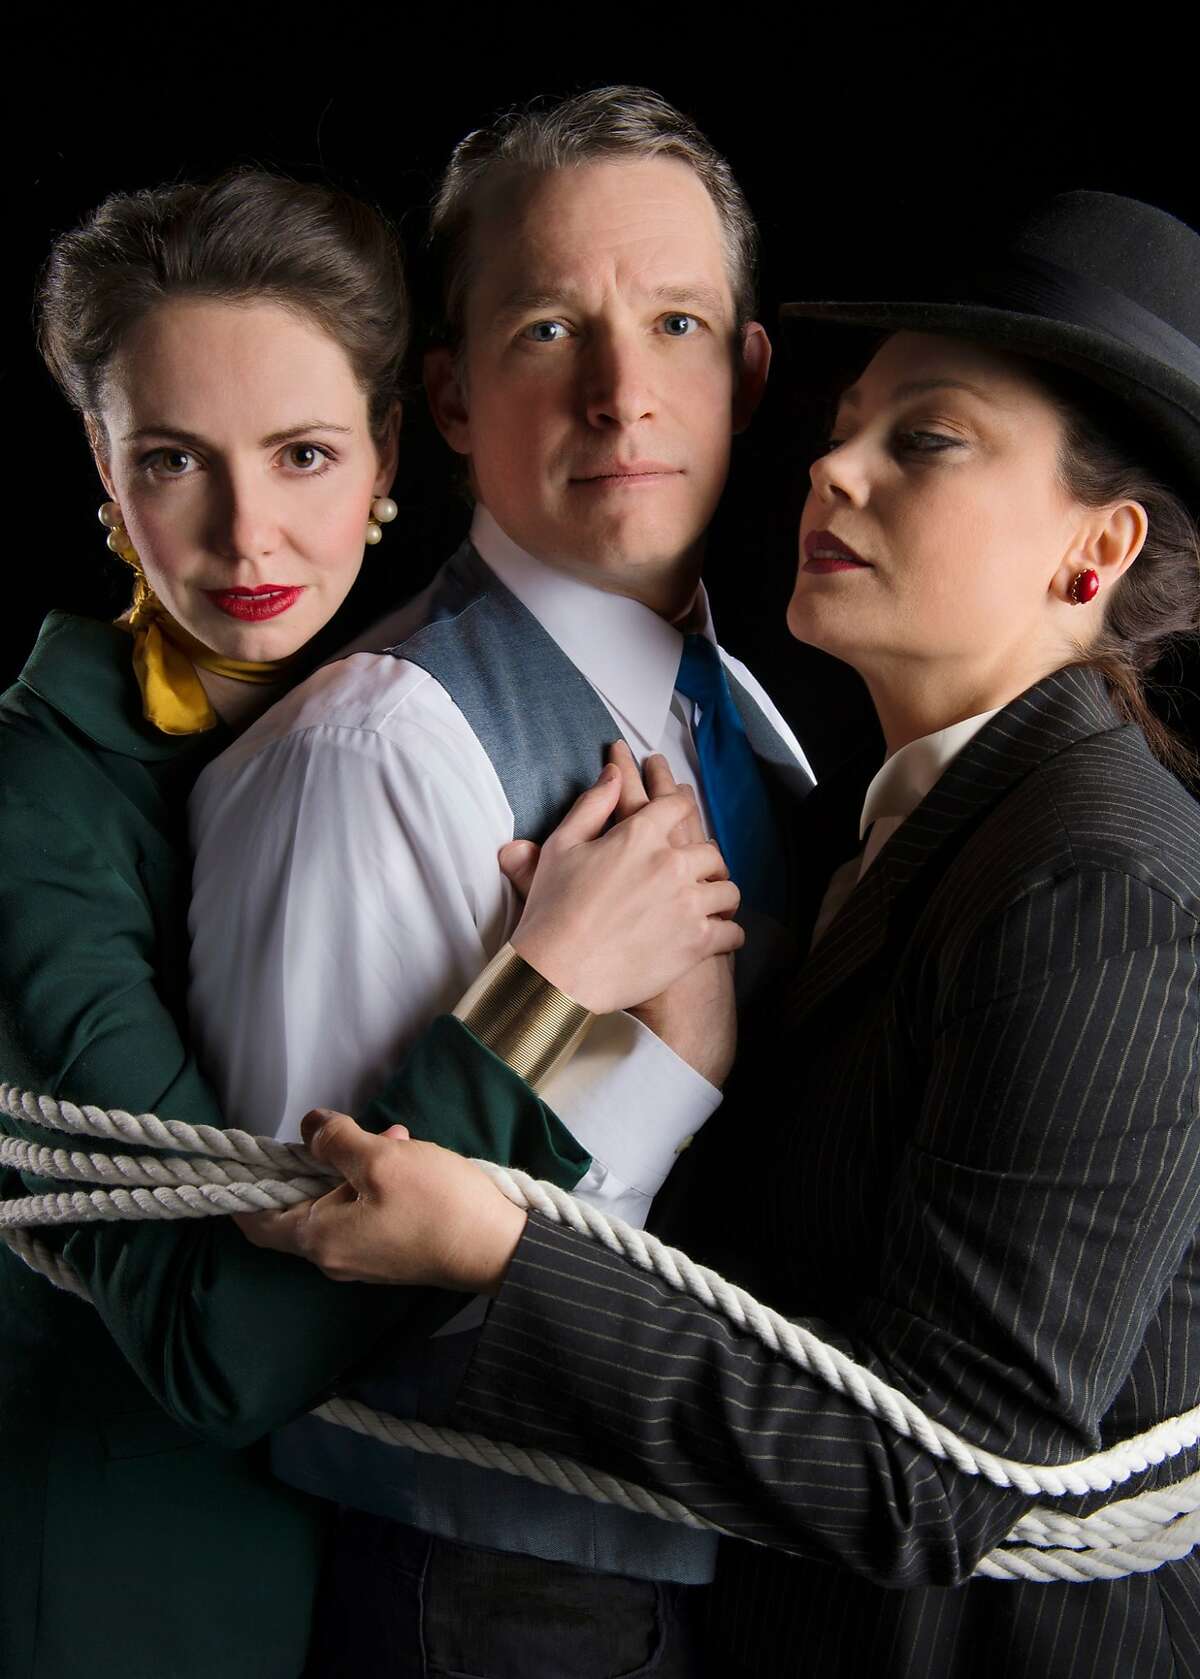 The cast of Marin Theatre Company's "Lasso of Truth" includes (from left) Liza Sklar as Amazon, Nicholas Rose as Inventor and Jessa Brie Moreno as Wife. Carson Kreitzer's world-premiere play is inspired by the life of William Moulton Marston, the creator of Wonder Woman, and the two women he lived with. The production runs through March 16 in Mill Valley. Photo by Kevin Berne